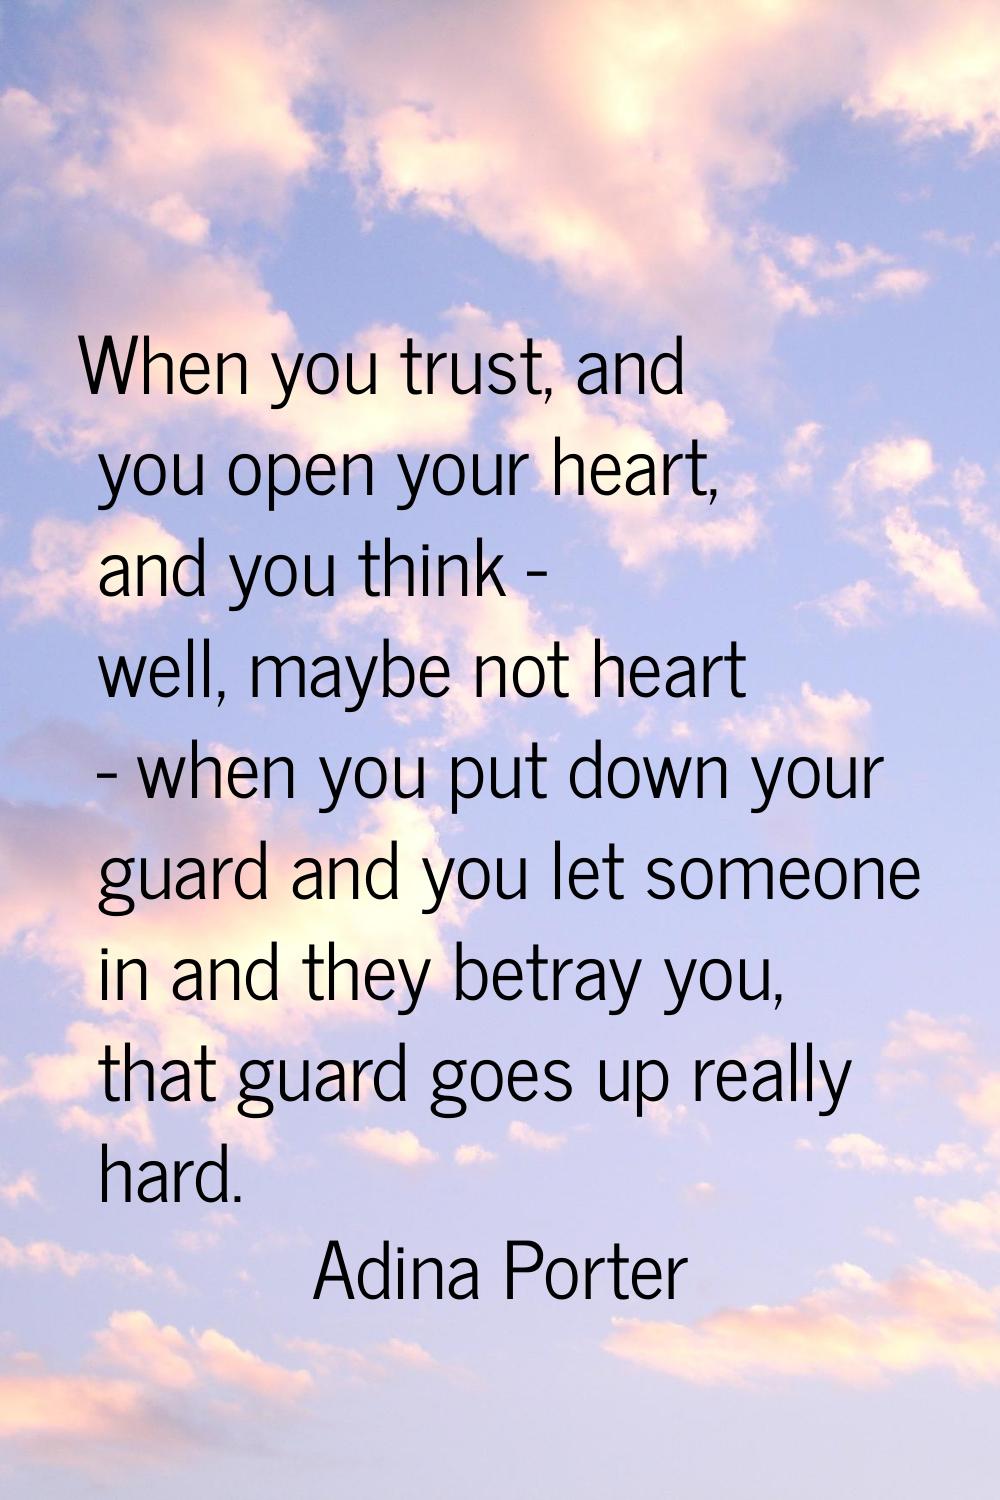 When you trust, and you open your heart, and you think - well, maybe not heart - when you put down 